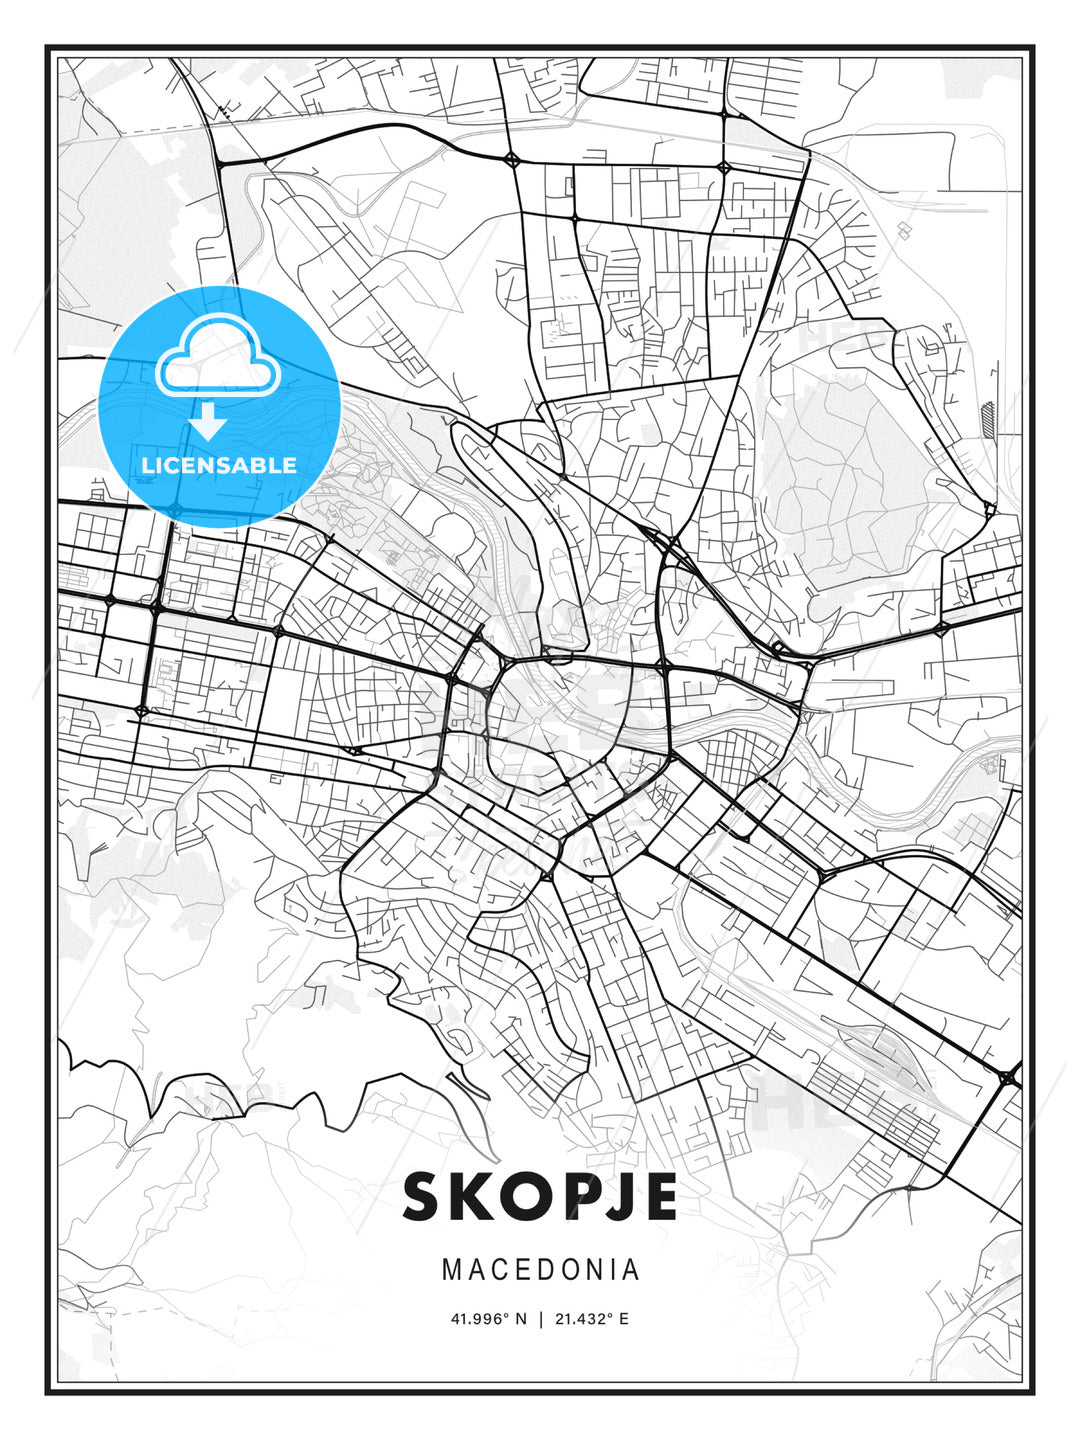 Skopje, Macedonia, Modern Print Template in Various Formats - HEBSTREITS Sketches